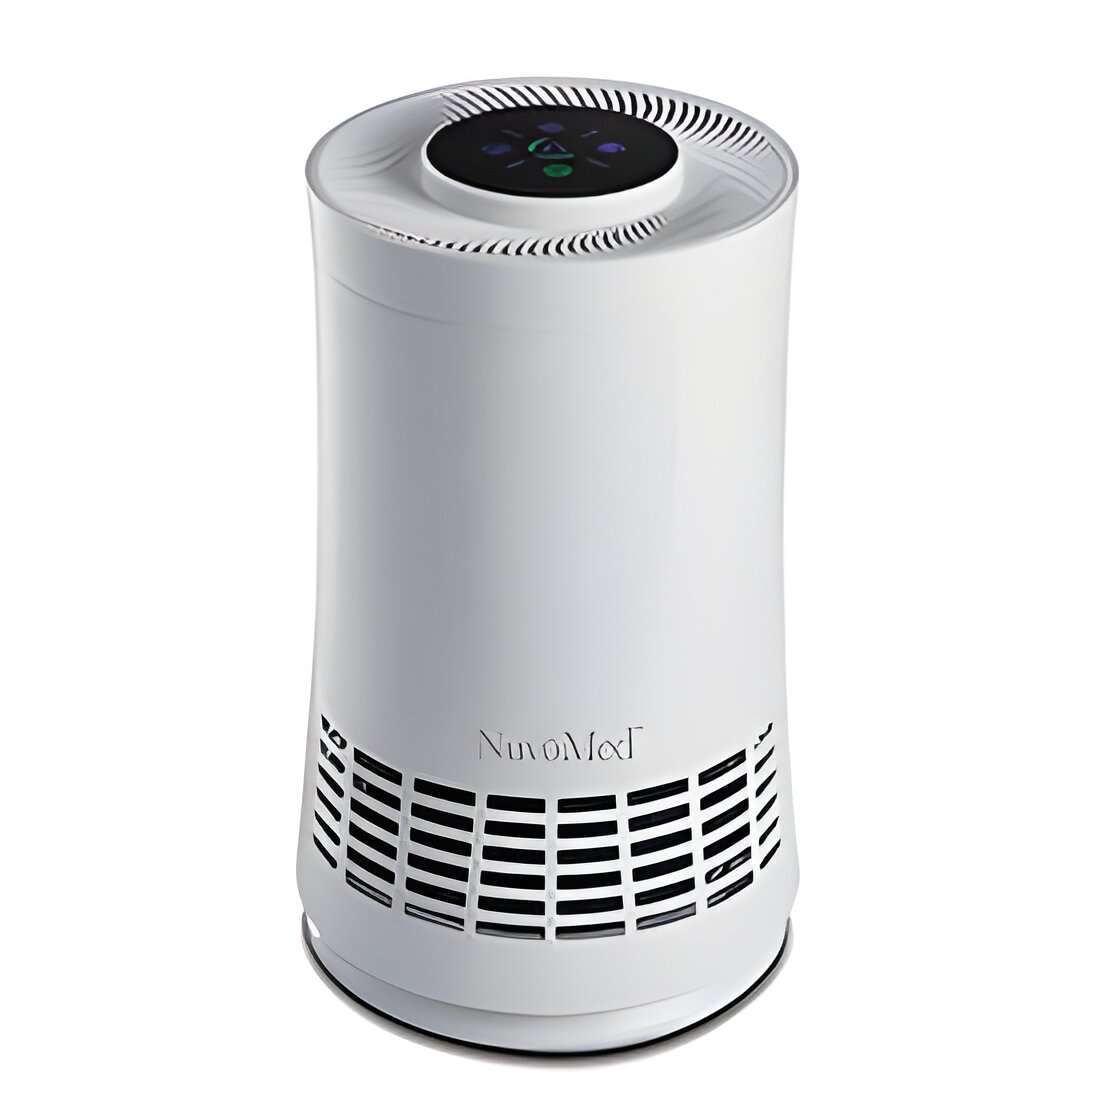 Free Air Purifier For Product Testers